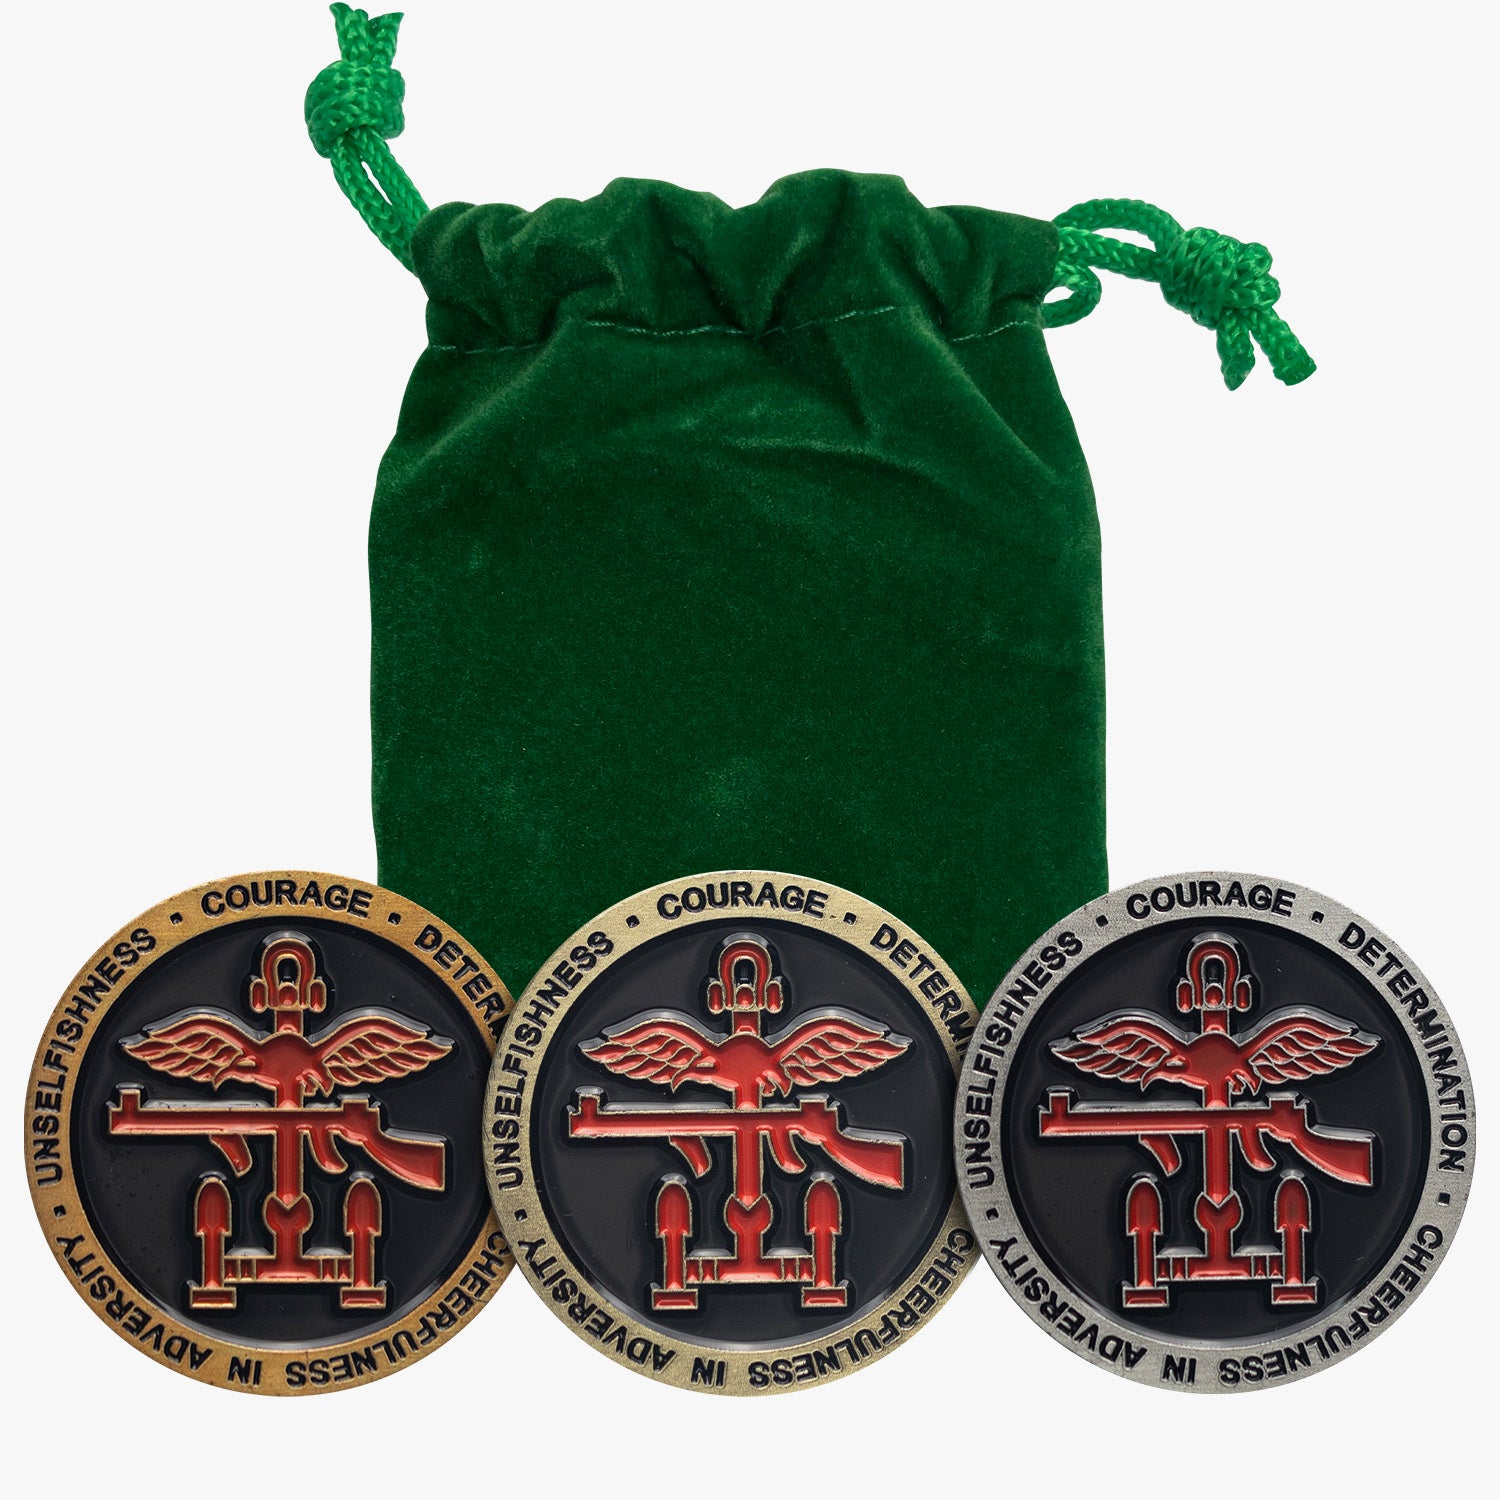 The Royal Marines Spoof Coin Set